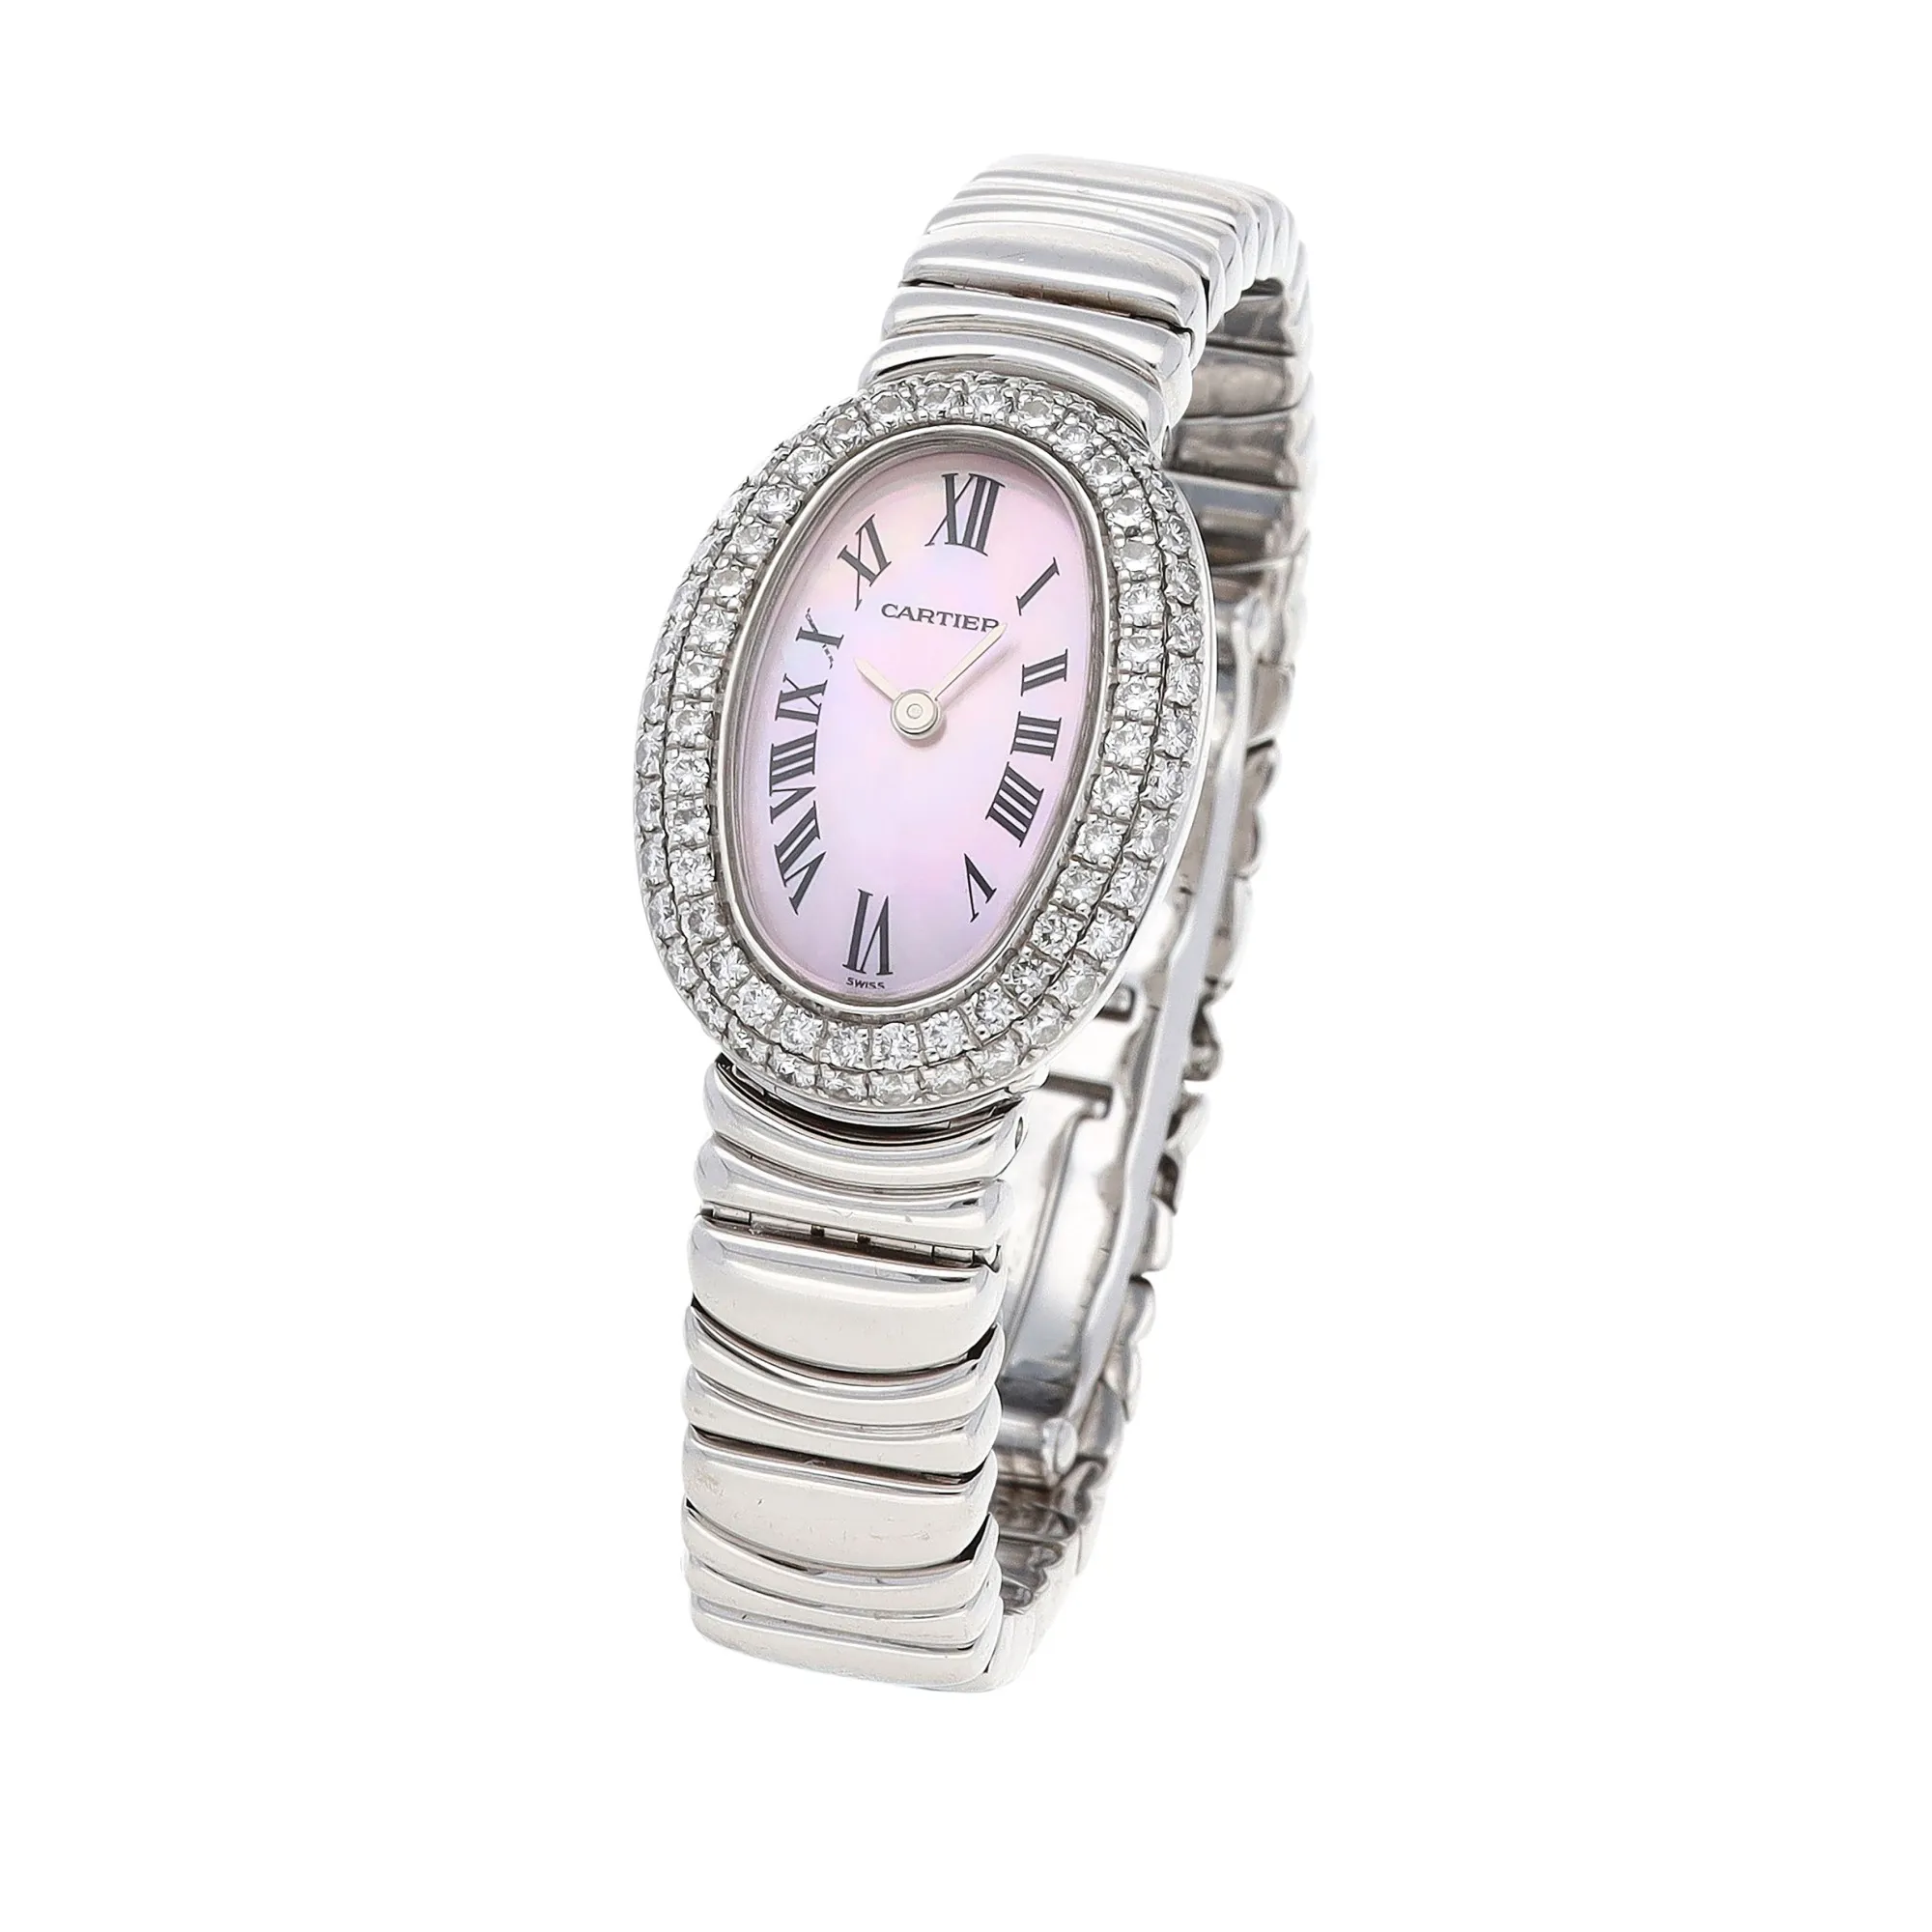 Cartier Baignoire Mini 2369 18mm White gold and diamond-set Mother-of-pearl 1